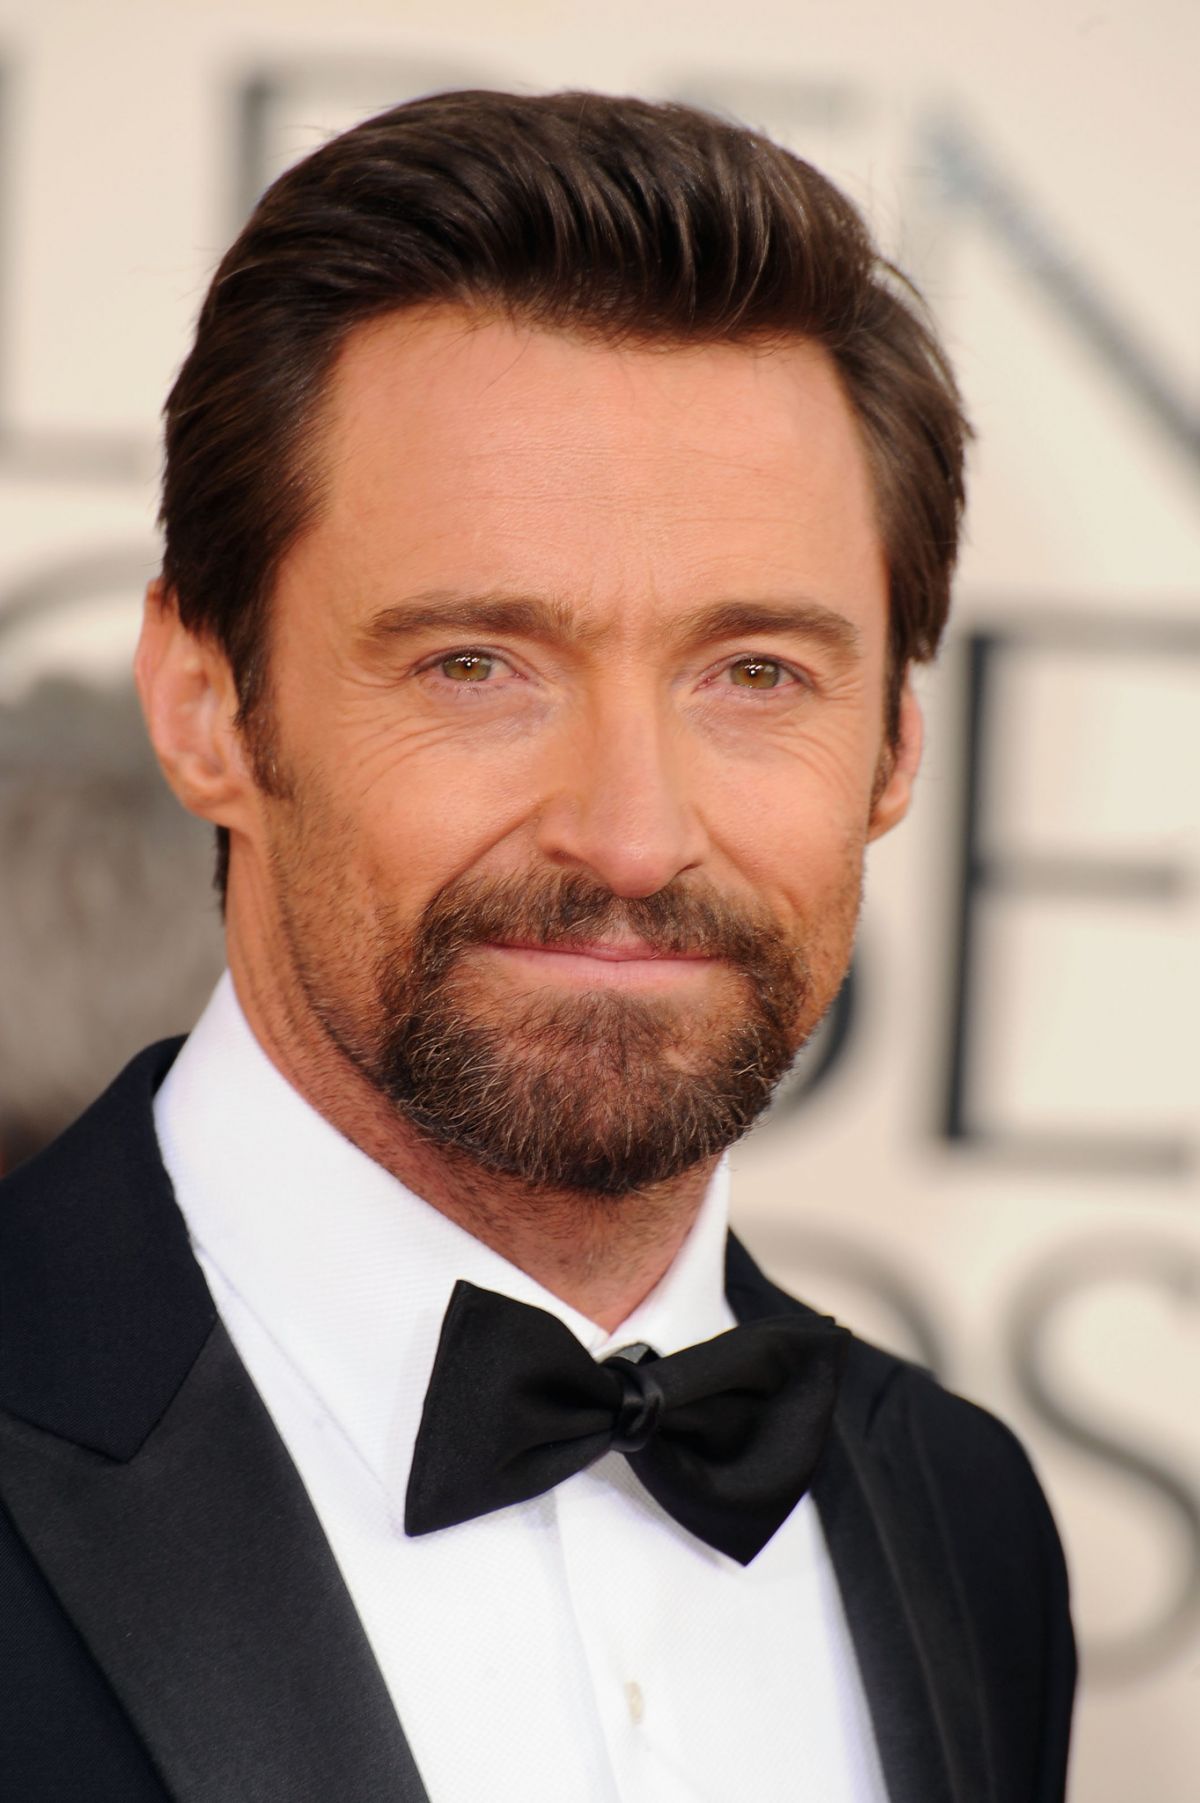 Hugh Michael Jackman's name also recorded in Guinness World Record Book